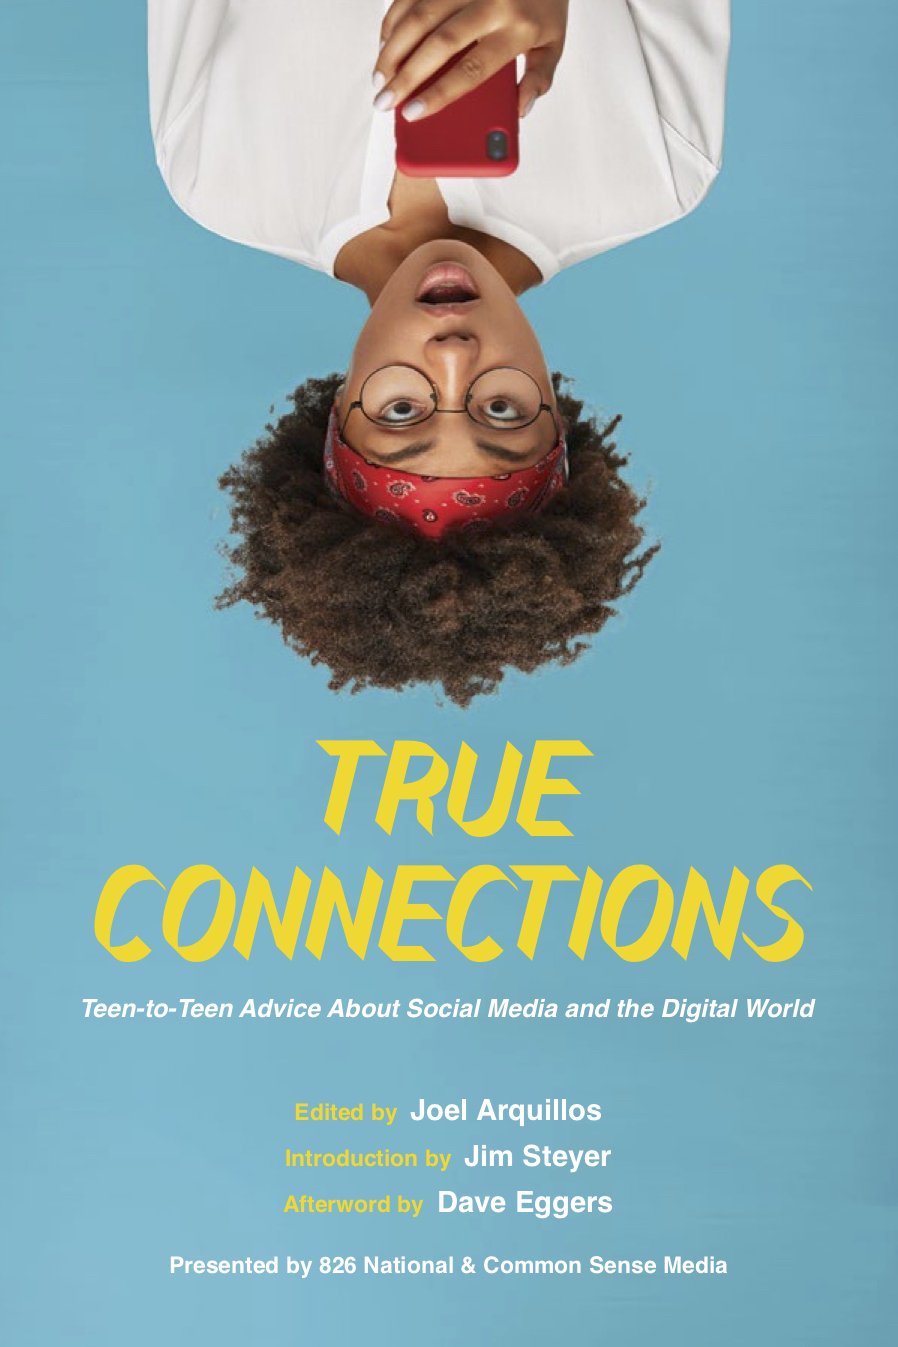 True Connections: Teen-to-Teen Advice About Social Media and the Digital World